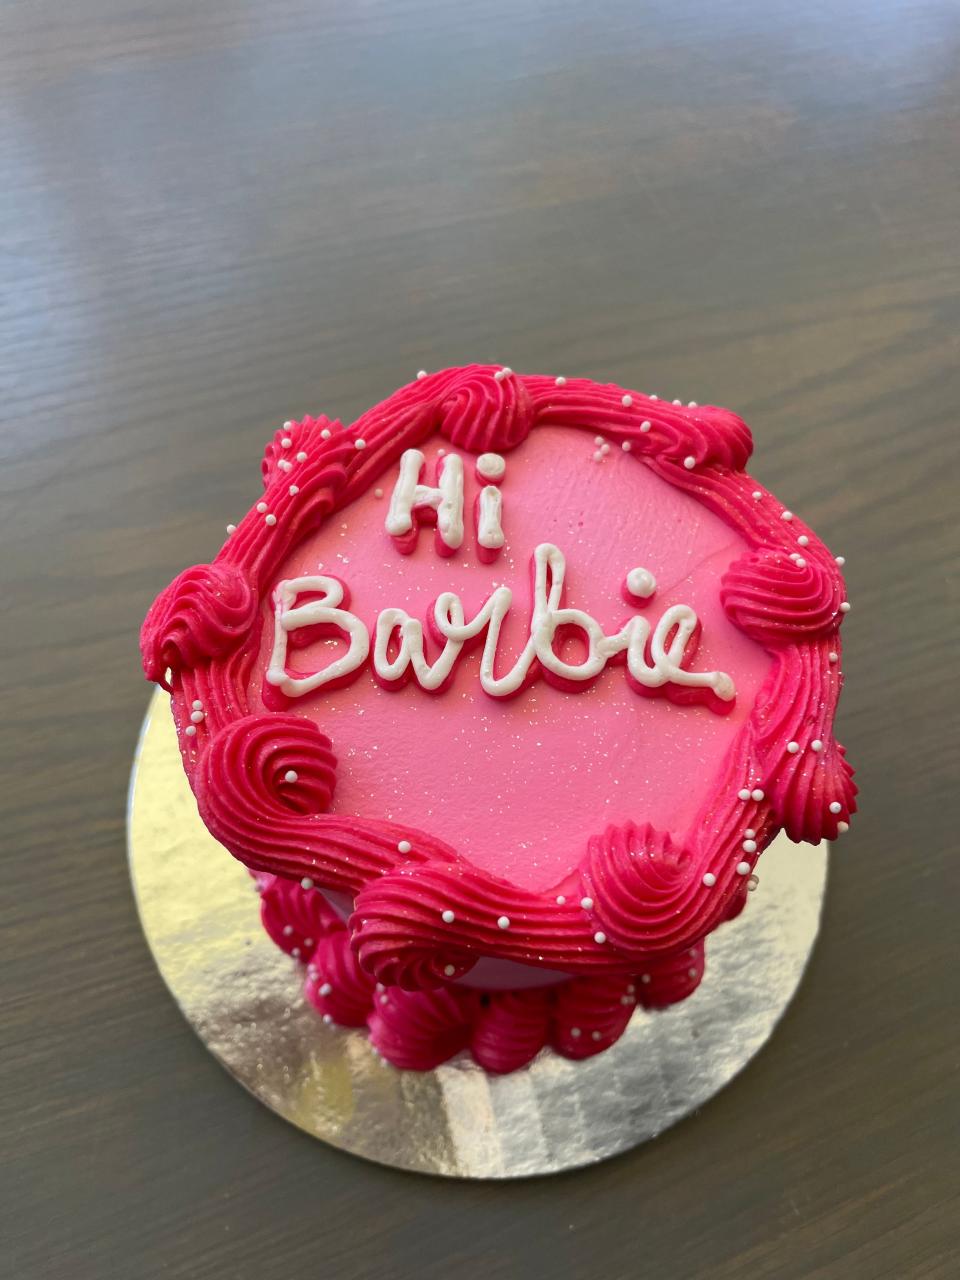 Barbie cake from The Snackery in Rye.